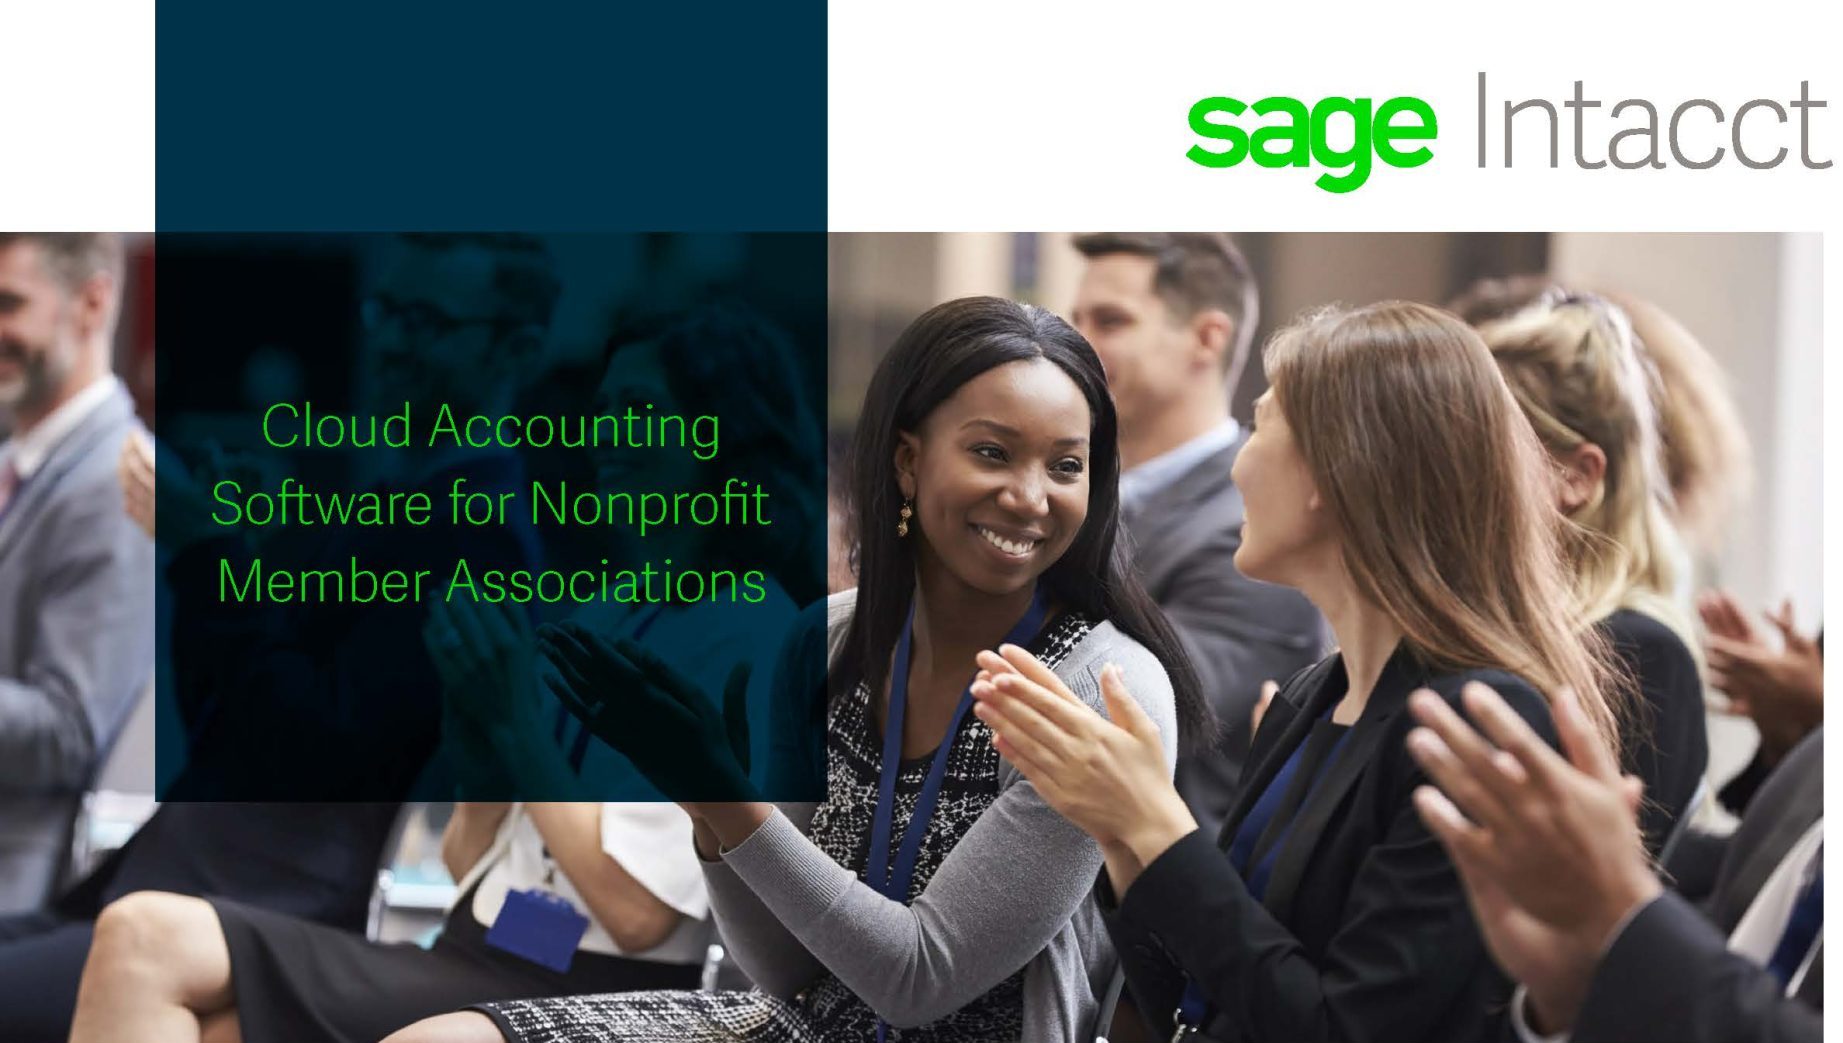 Cloud Accounting Software for Nonprofit Member Associations